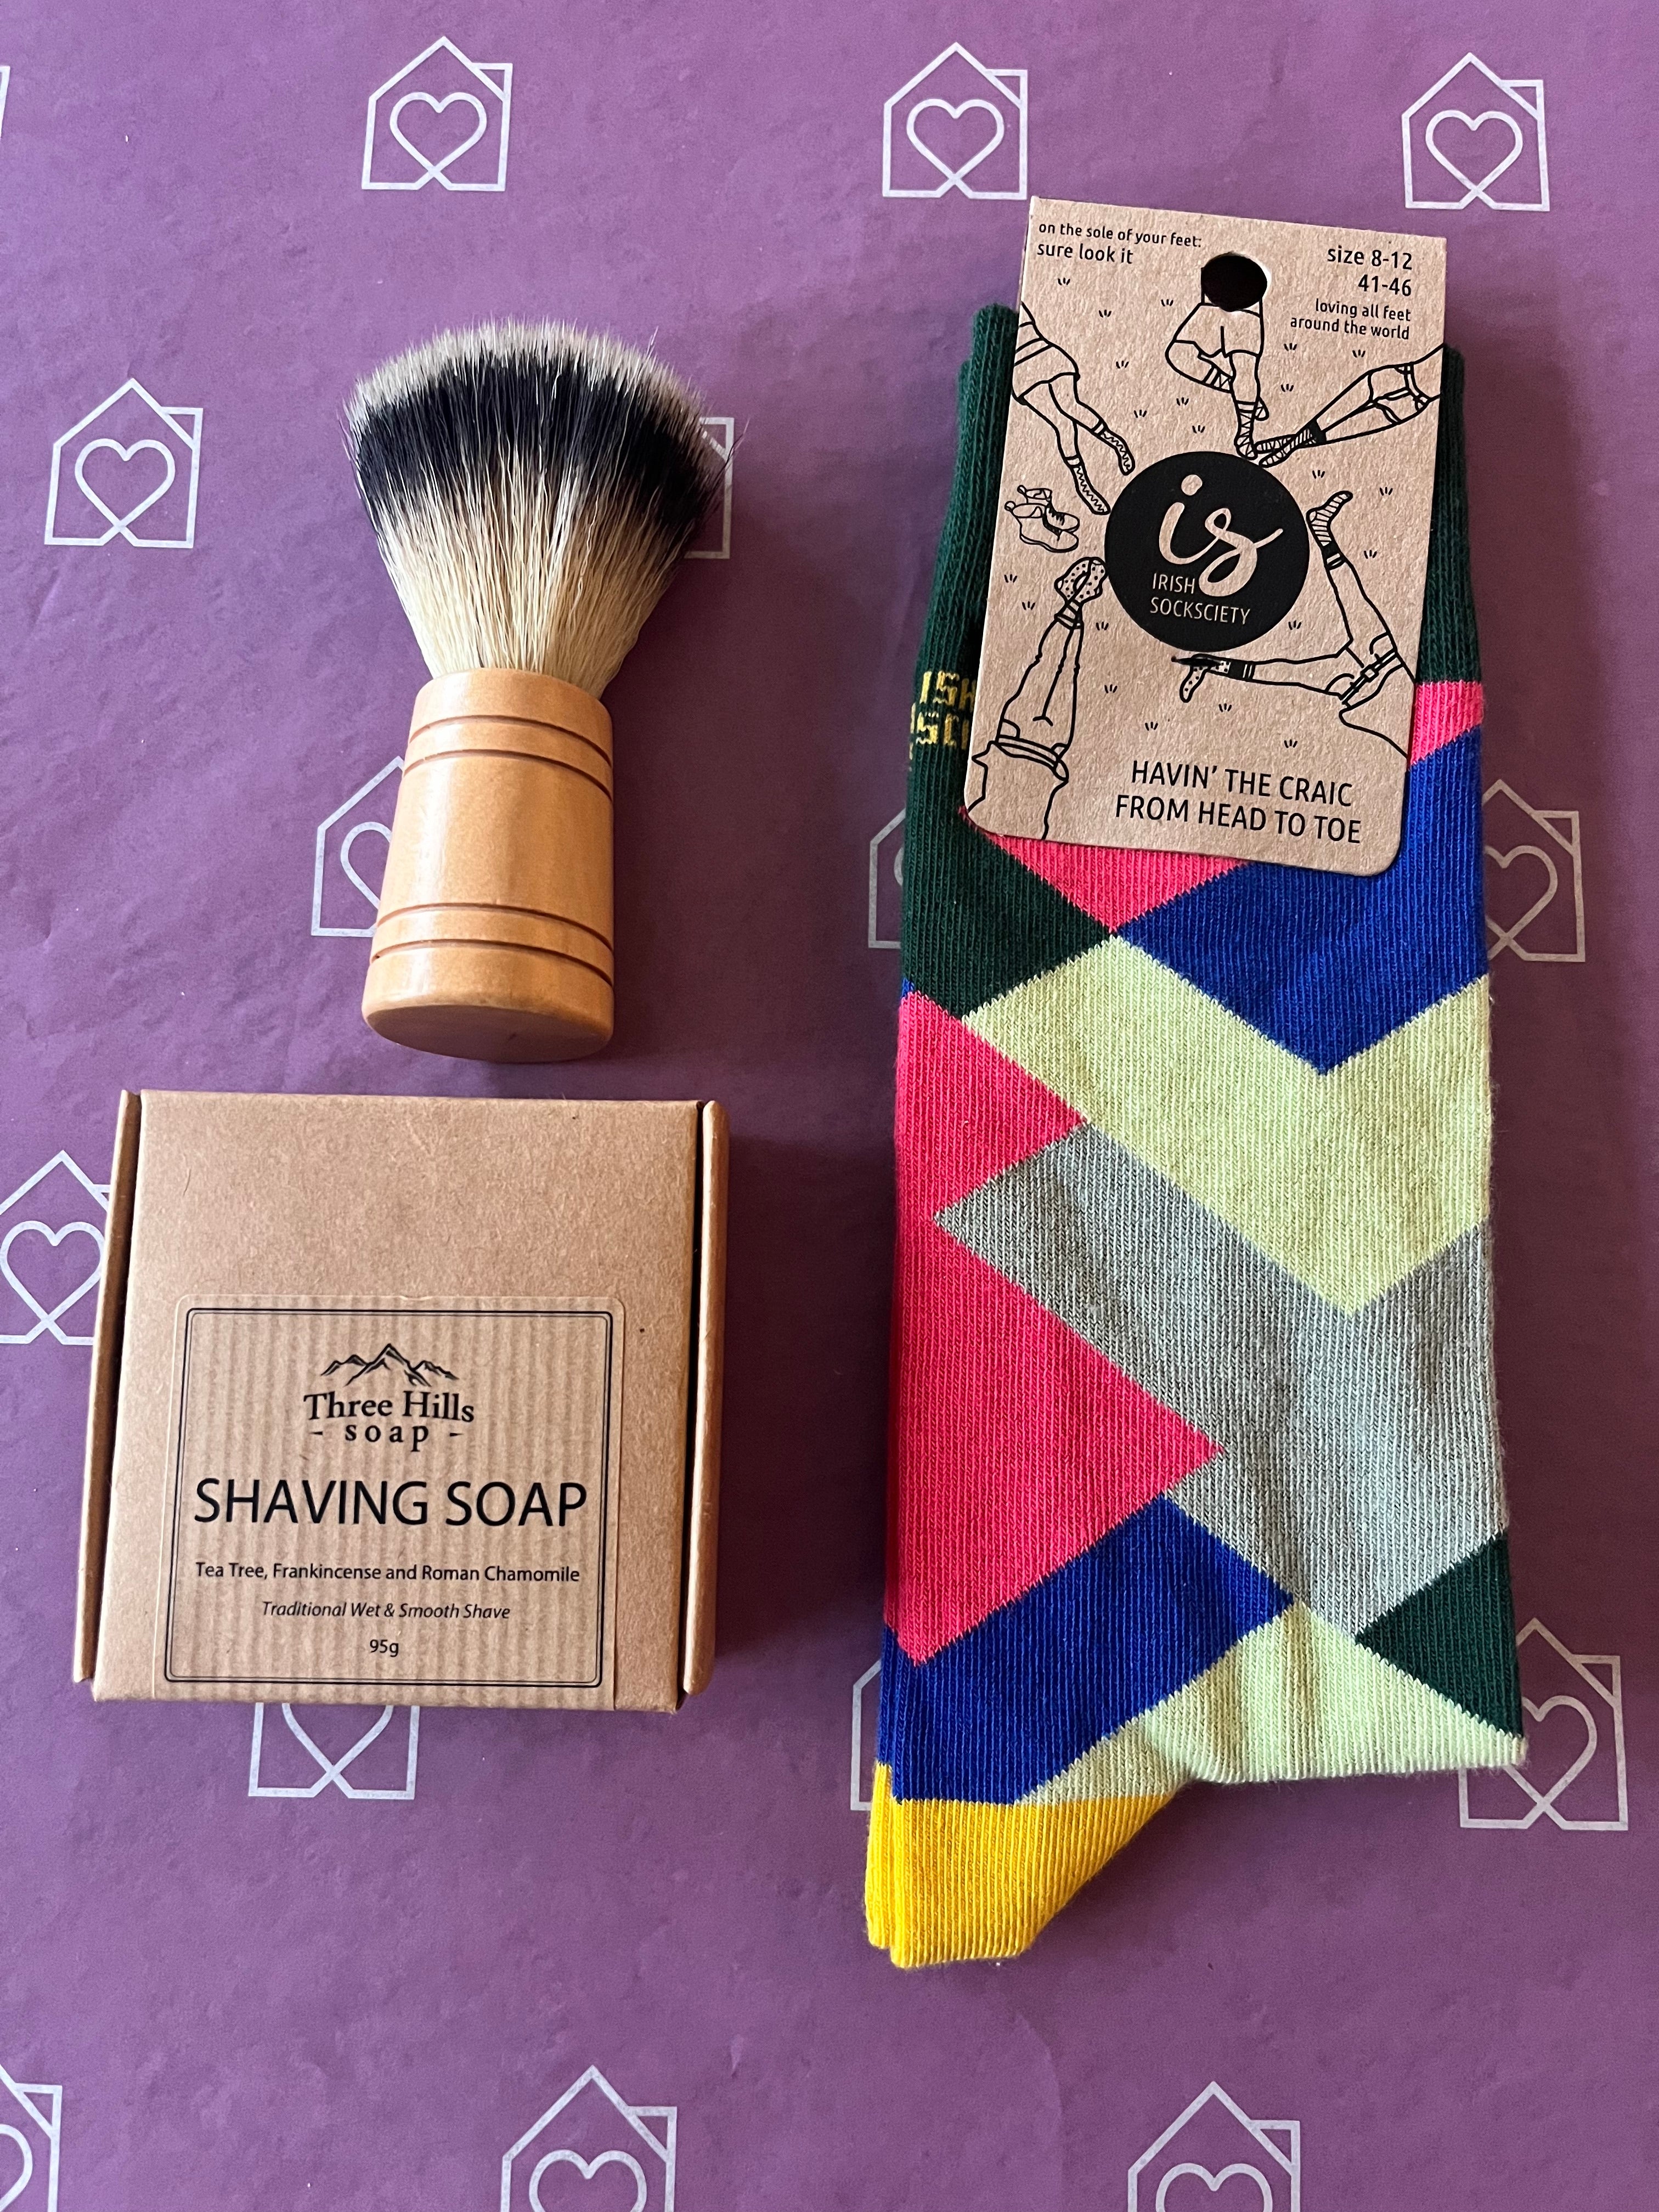 The Shave Gift Box